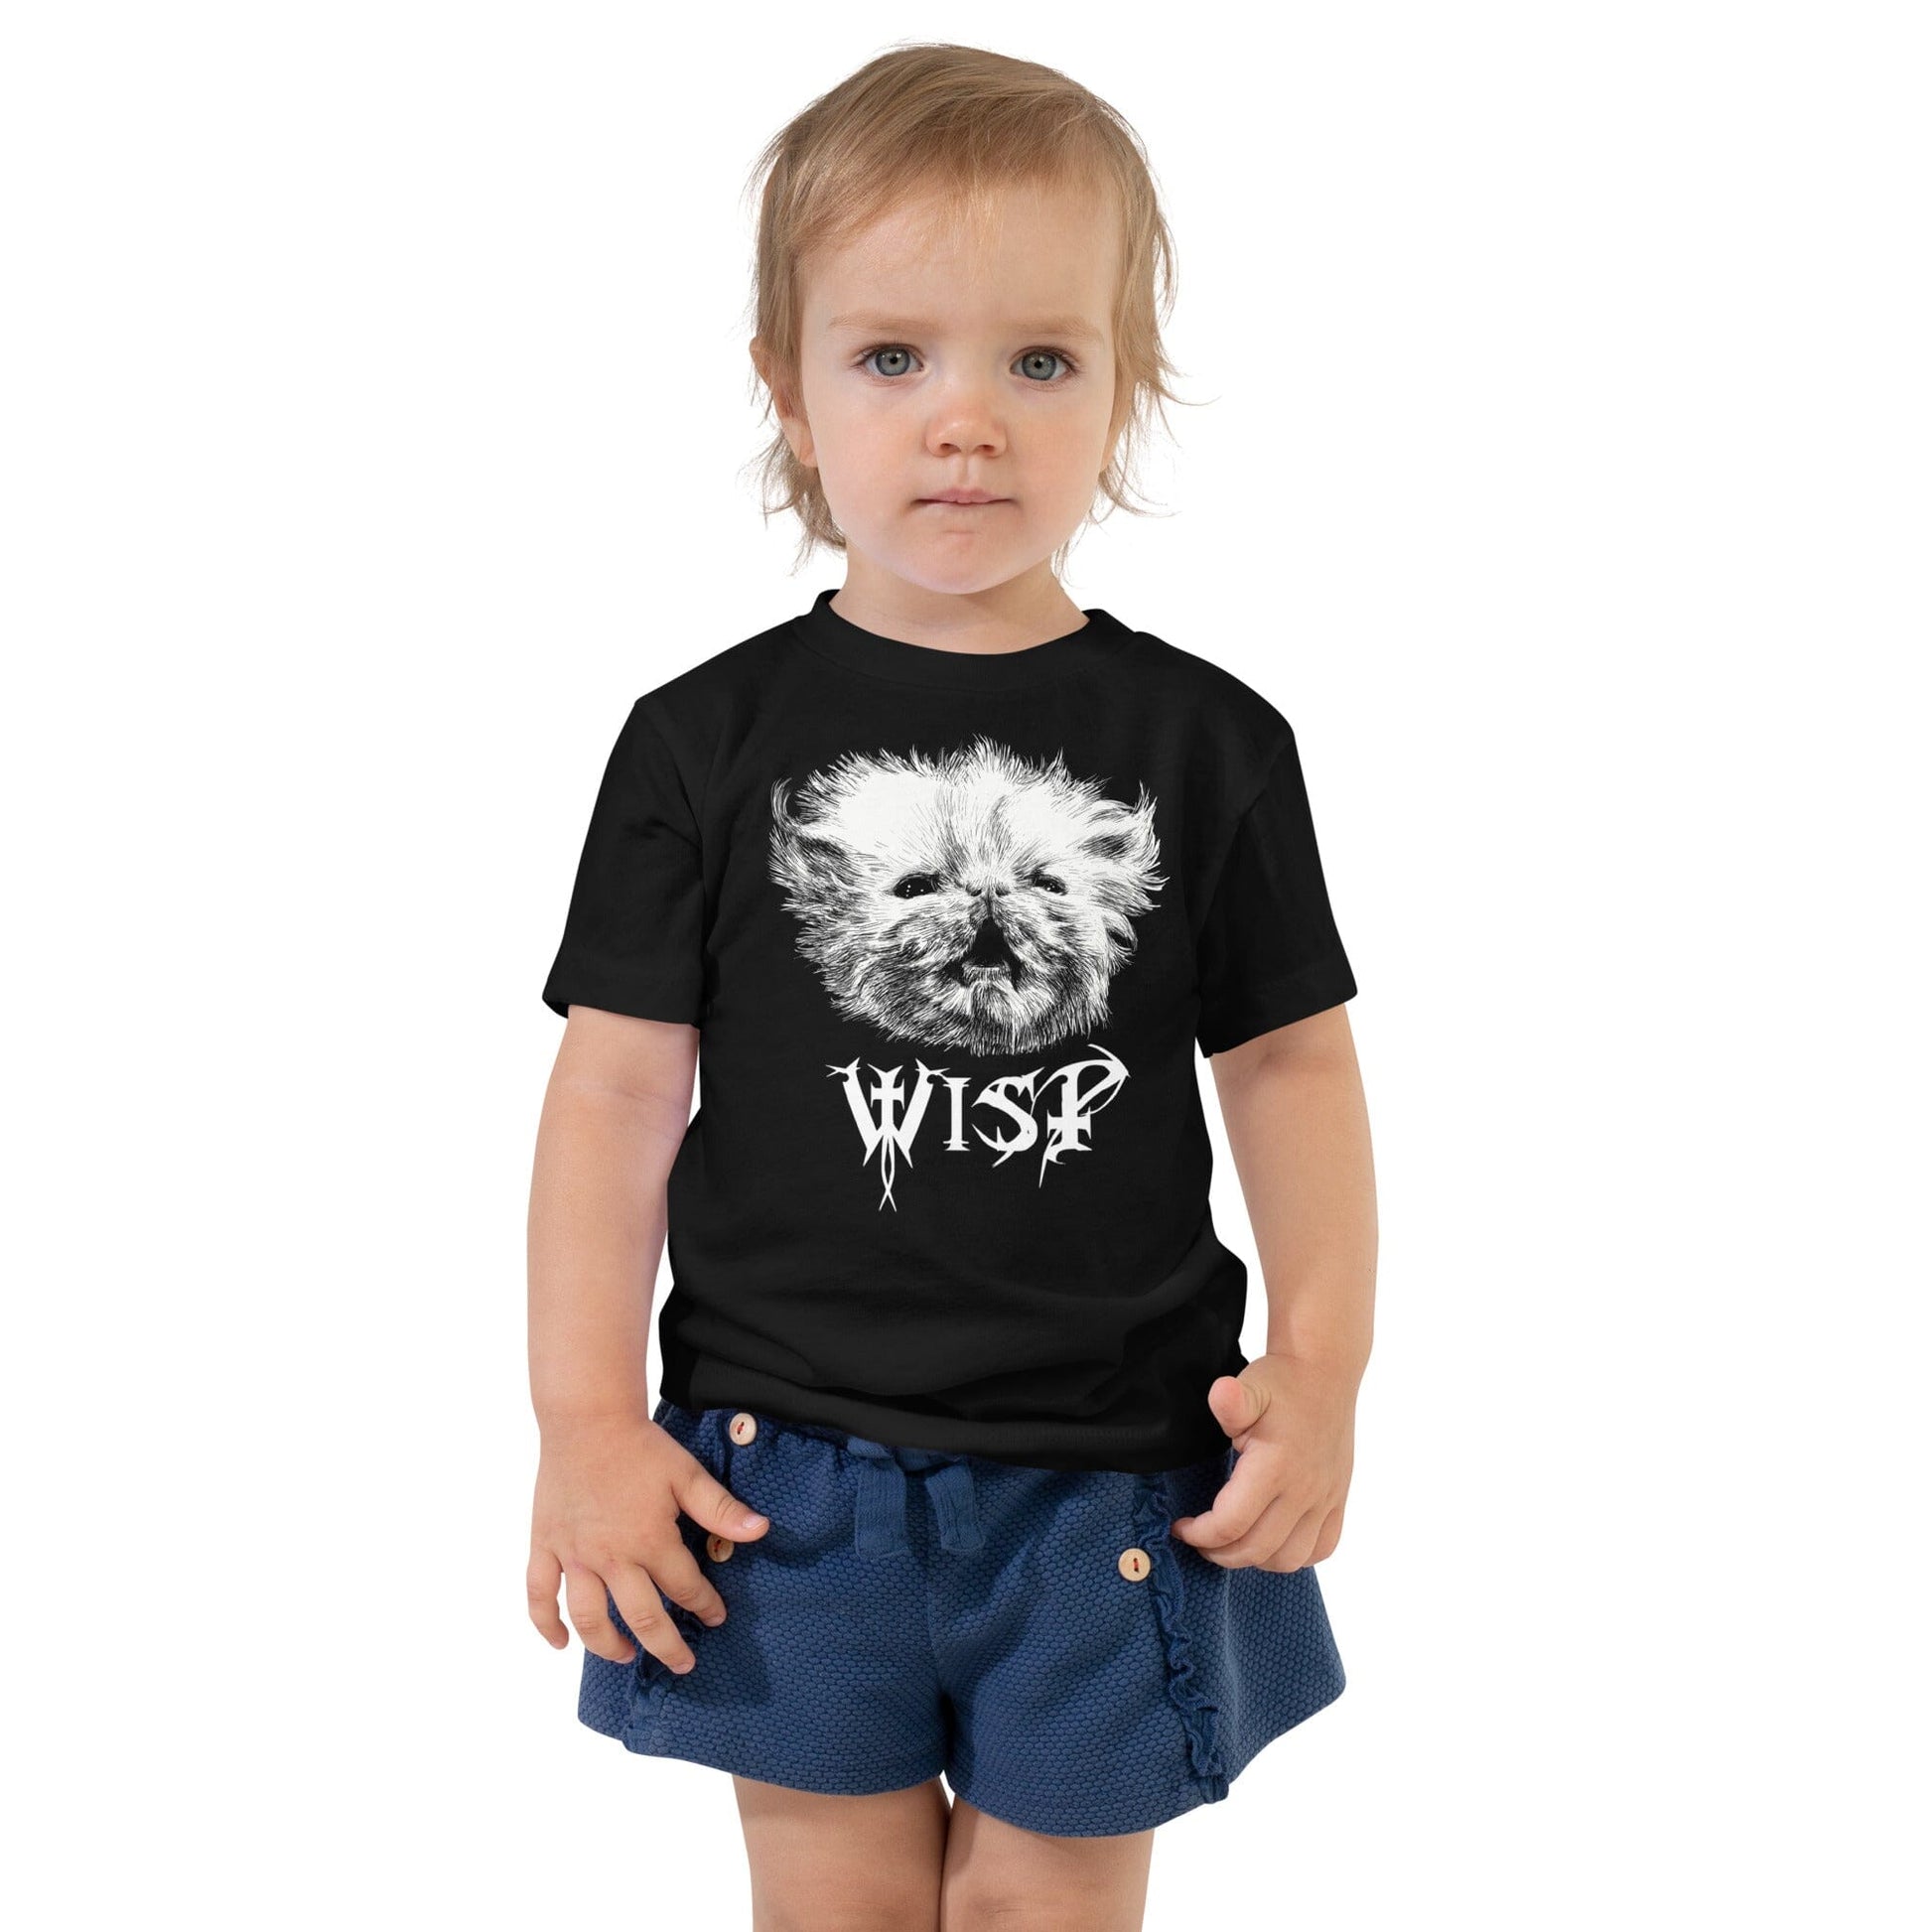 BLACK Metal Wisp TODDLER T-Shirt [Unfoiled] (All net proceeds go to Rags to Riches Animal Rescue) JoyousJoyfulJoyness 